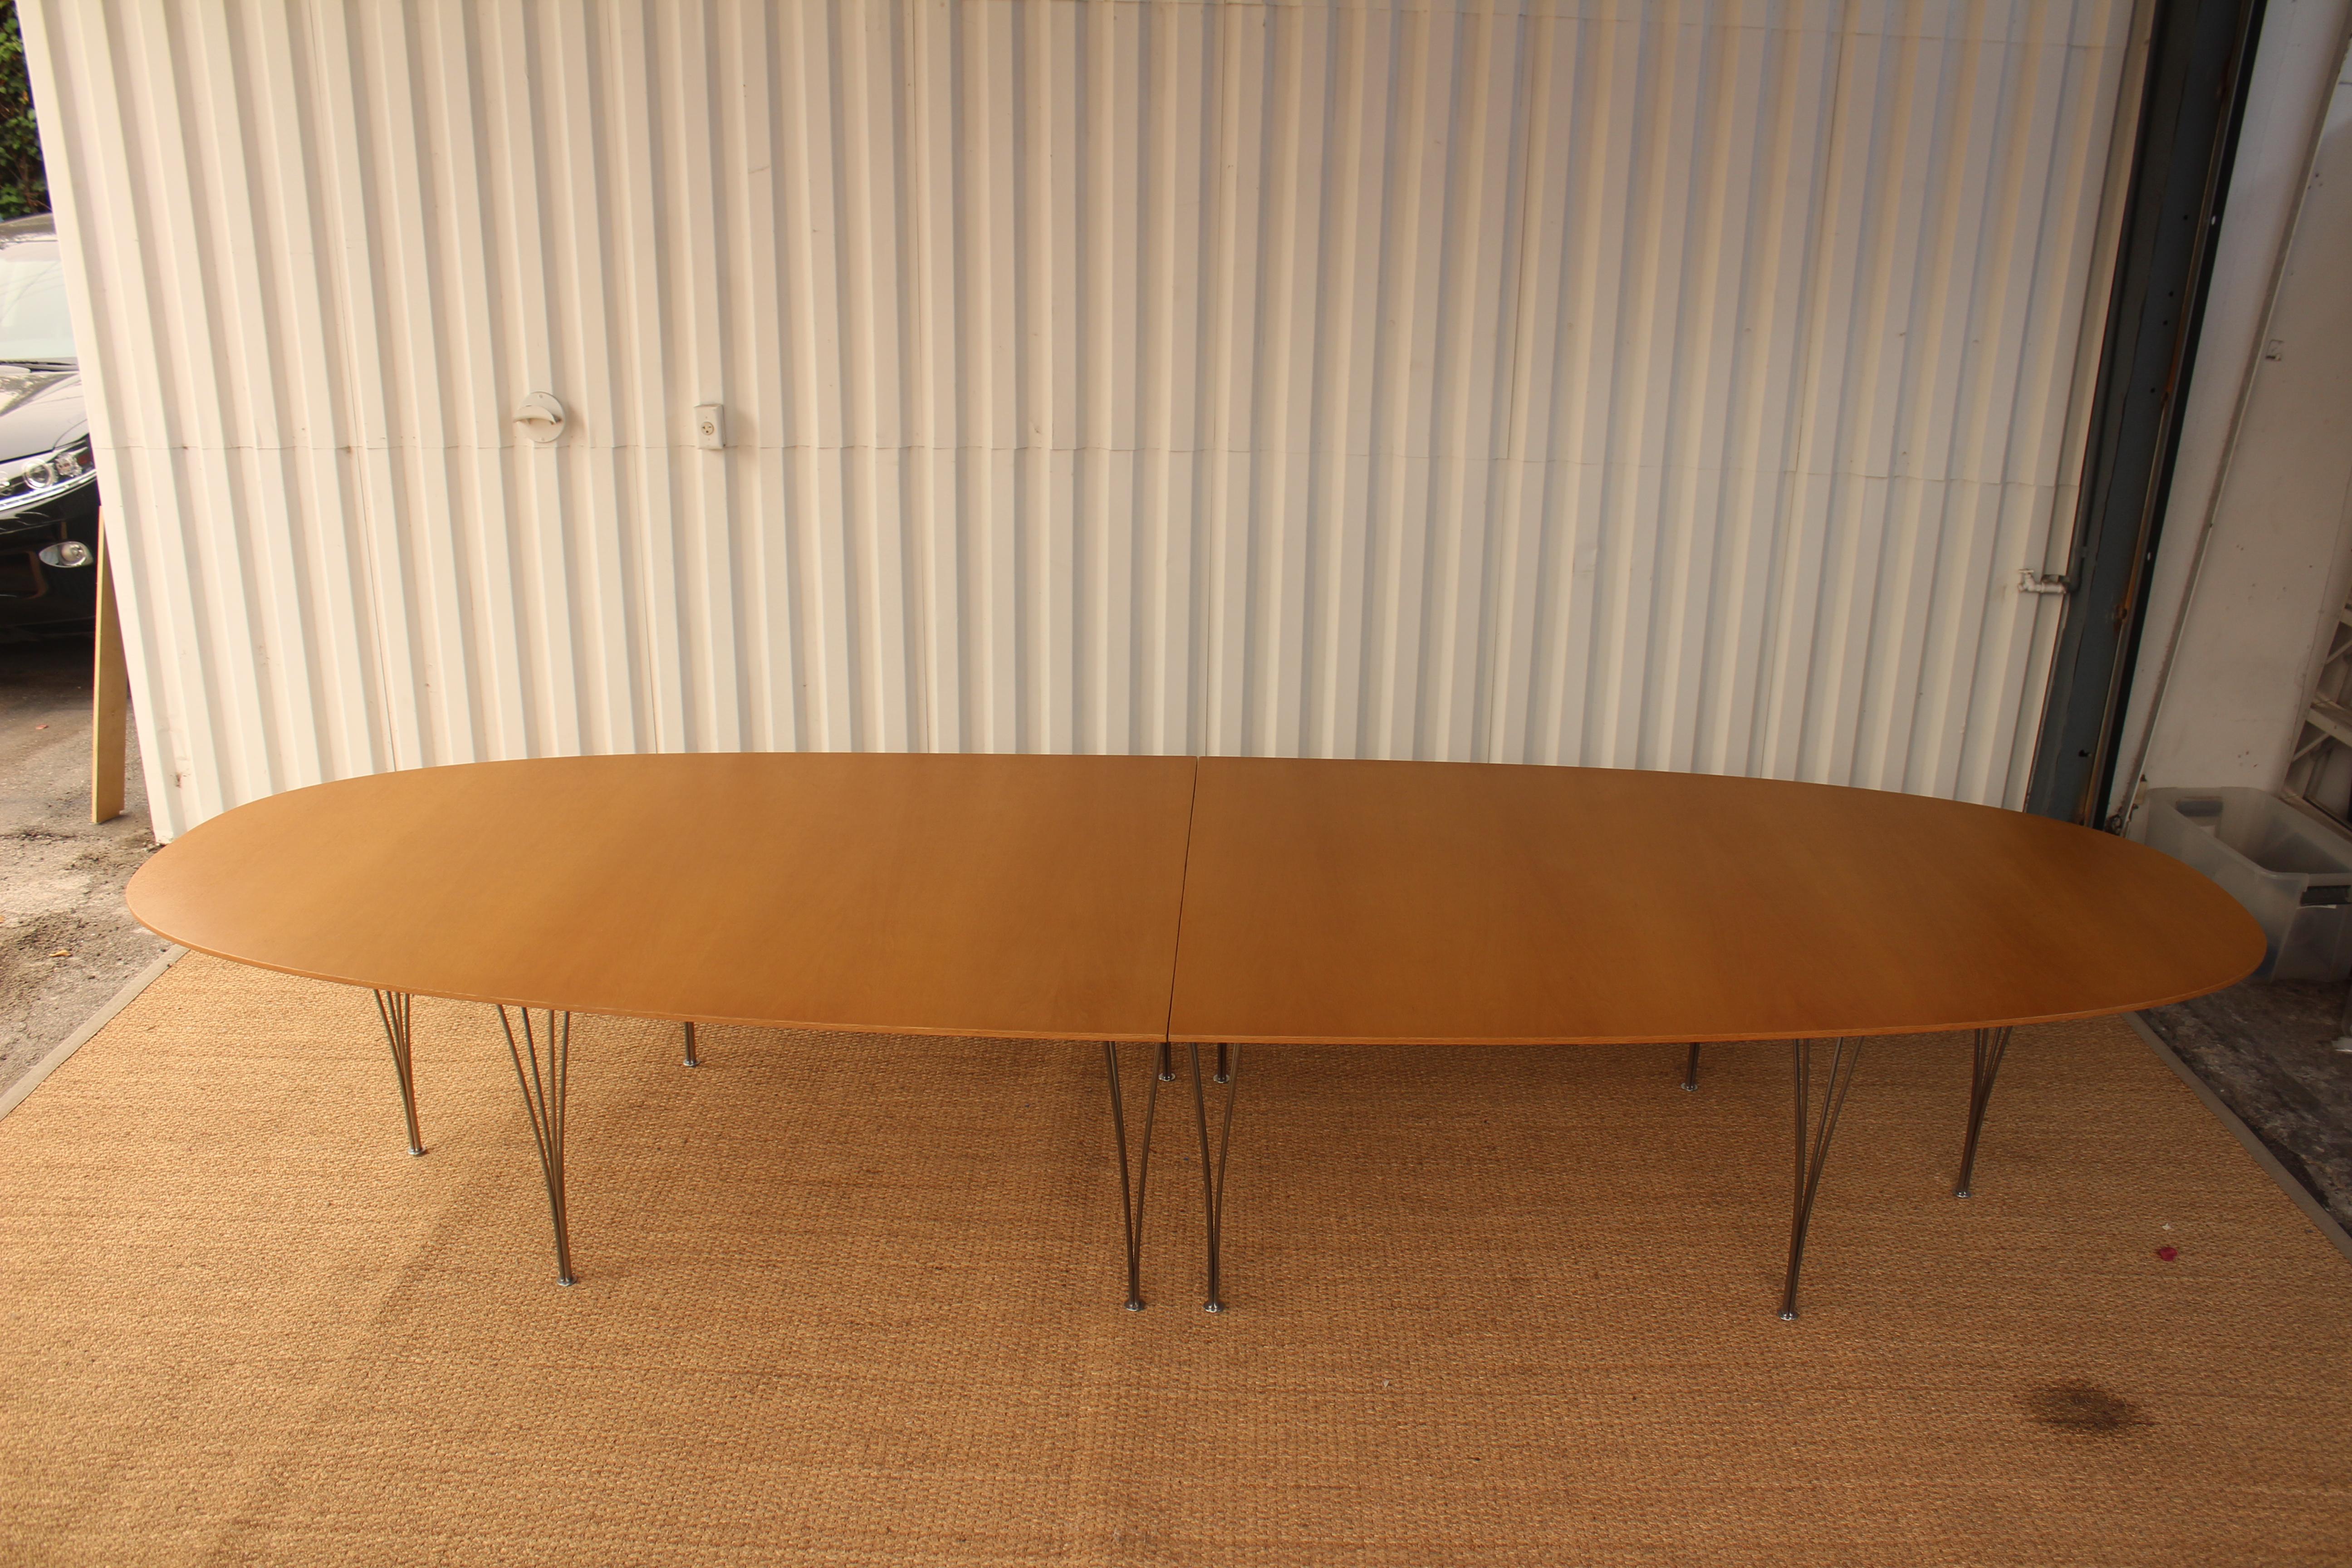 Vintage Ellipse dining table or conference table designed by Piet Hein for Fritz Hansen, Denmark, 1960s. Birch veneered top on solid steel legs. Top has been recently refinished and is in excellent condition. The chrome-plated steel legs show minor